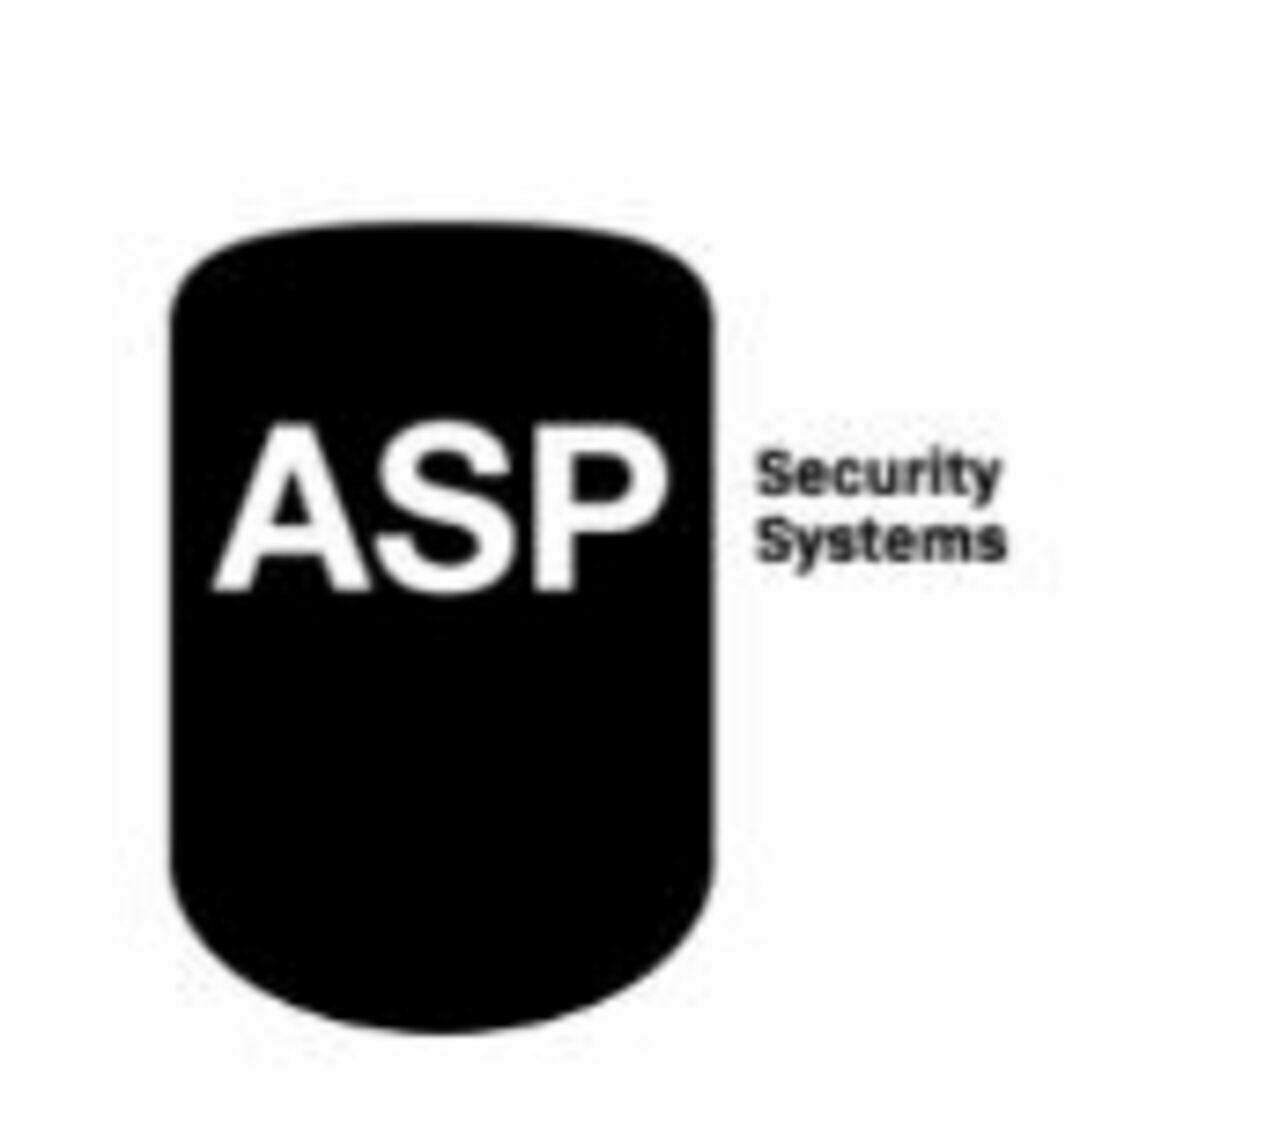 ASP Security Systems's logo